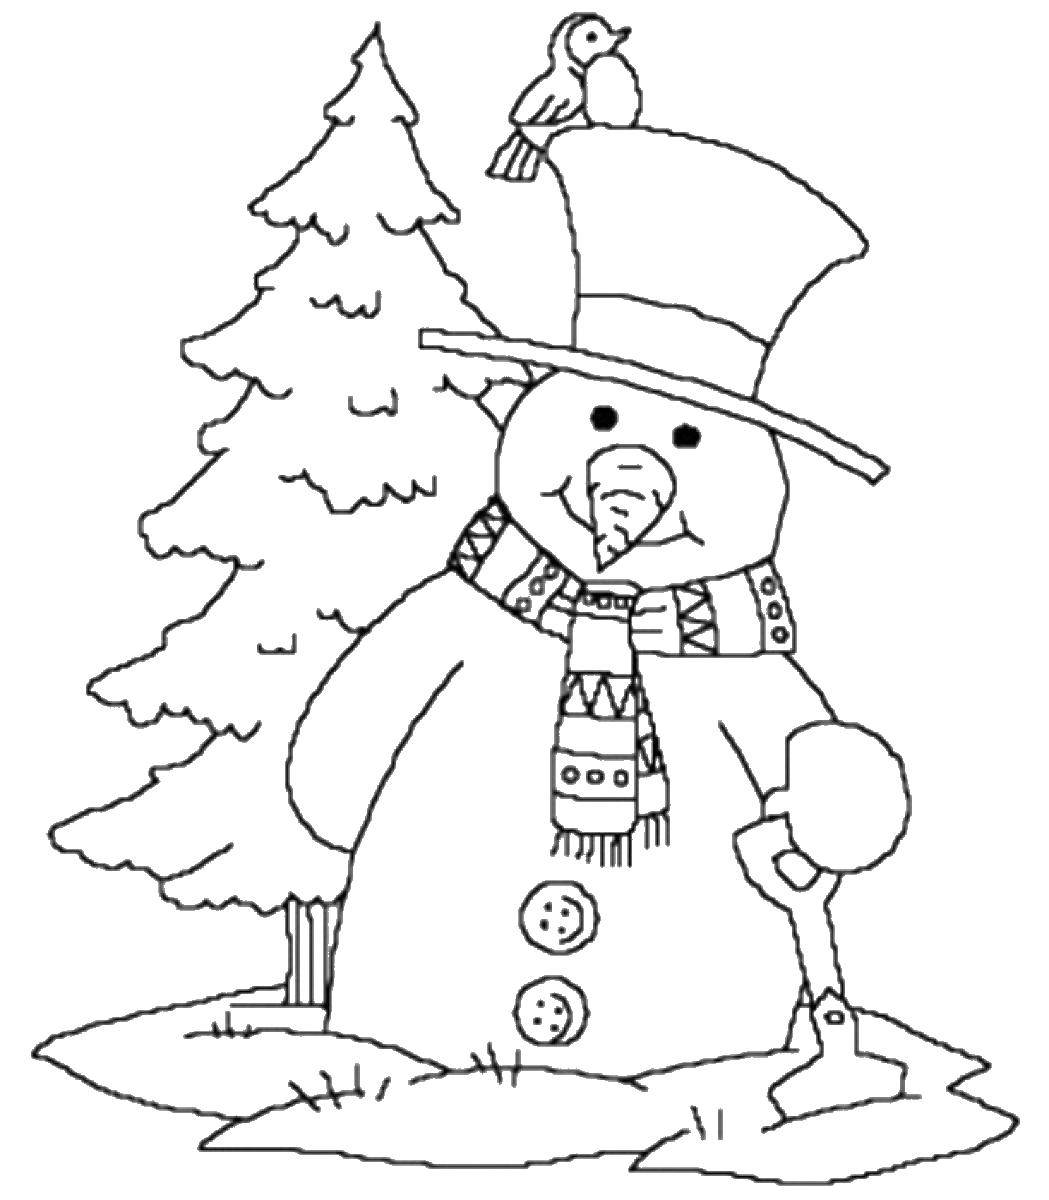 Coloring Snowman clears the snow. Category coloring winter. Tags:  Snowman, snow, winter.